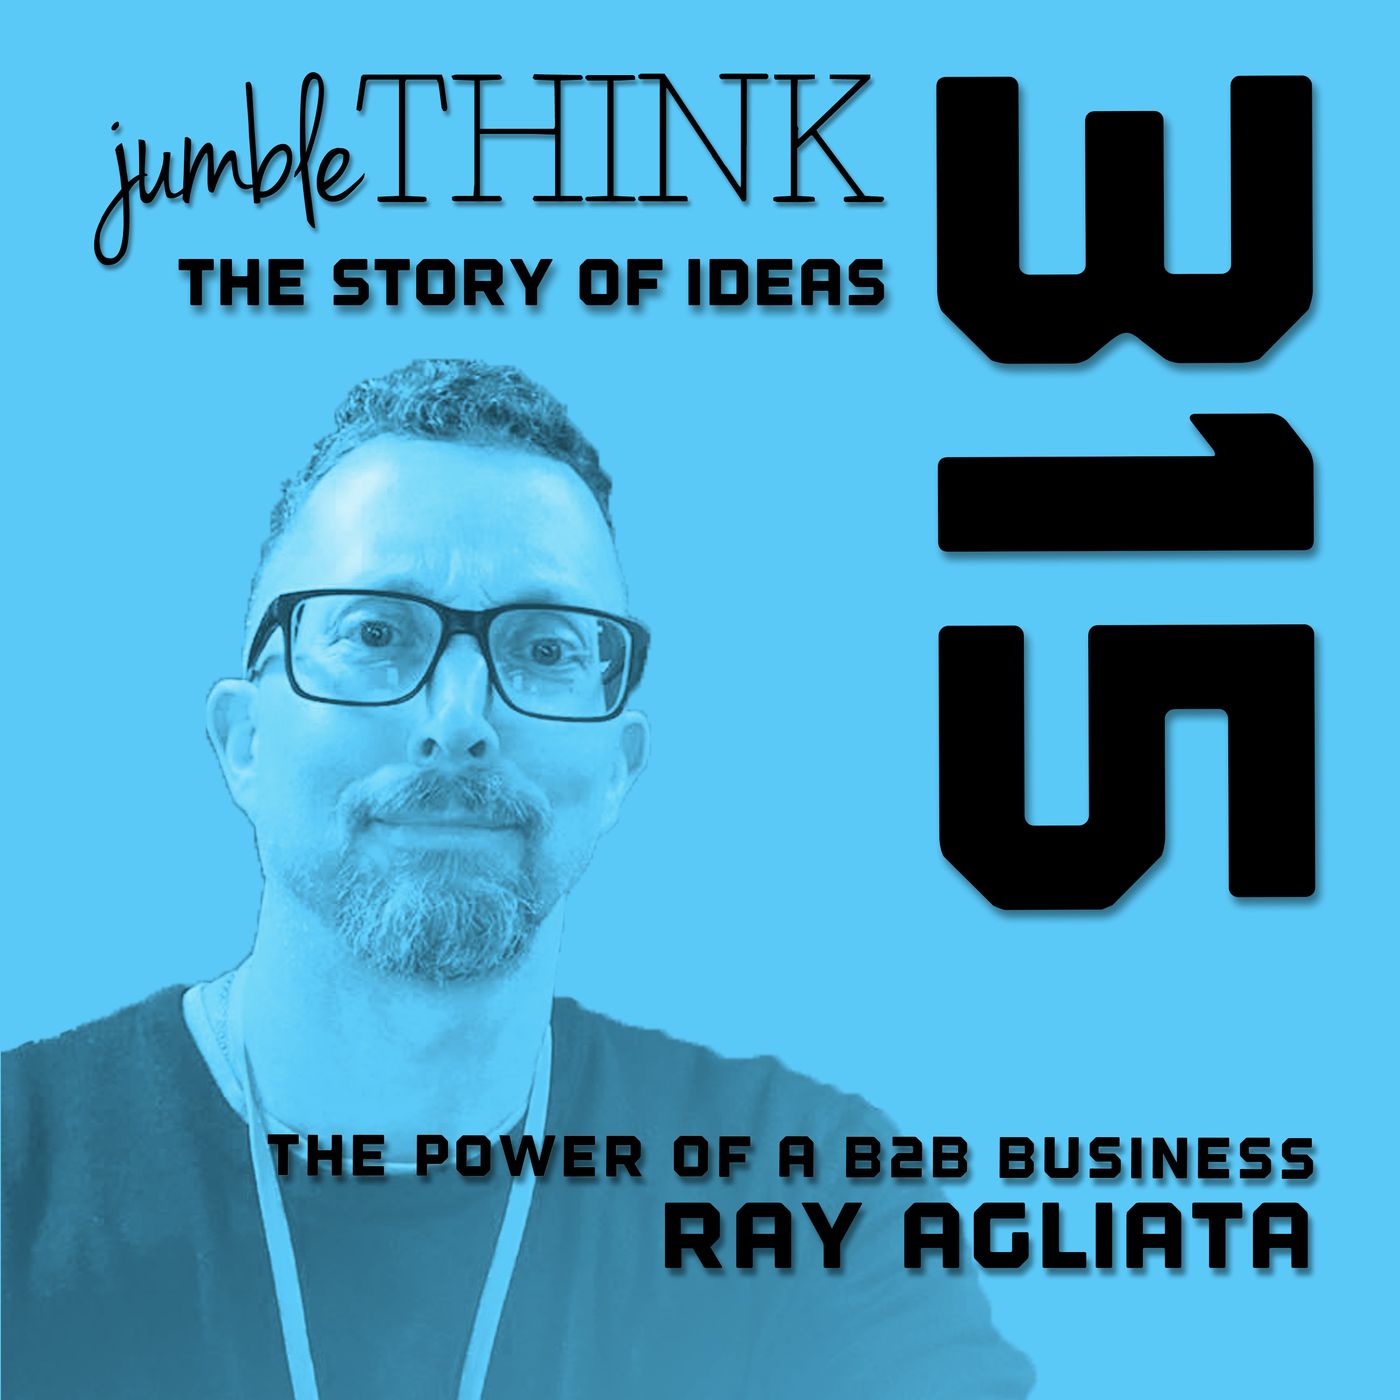 The Power of a B2B Business with Ray Agliata